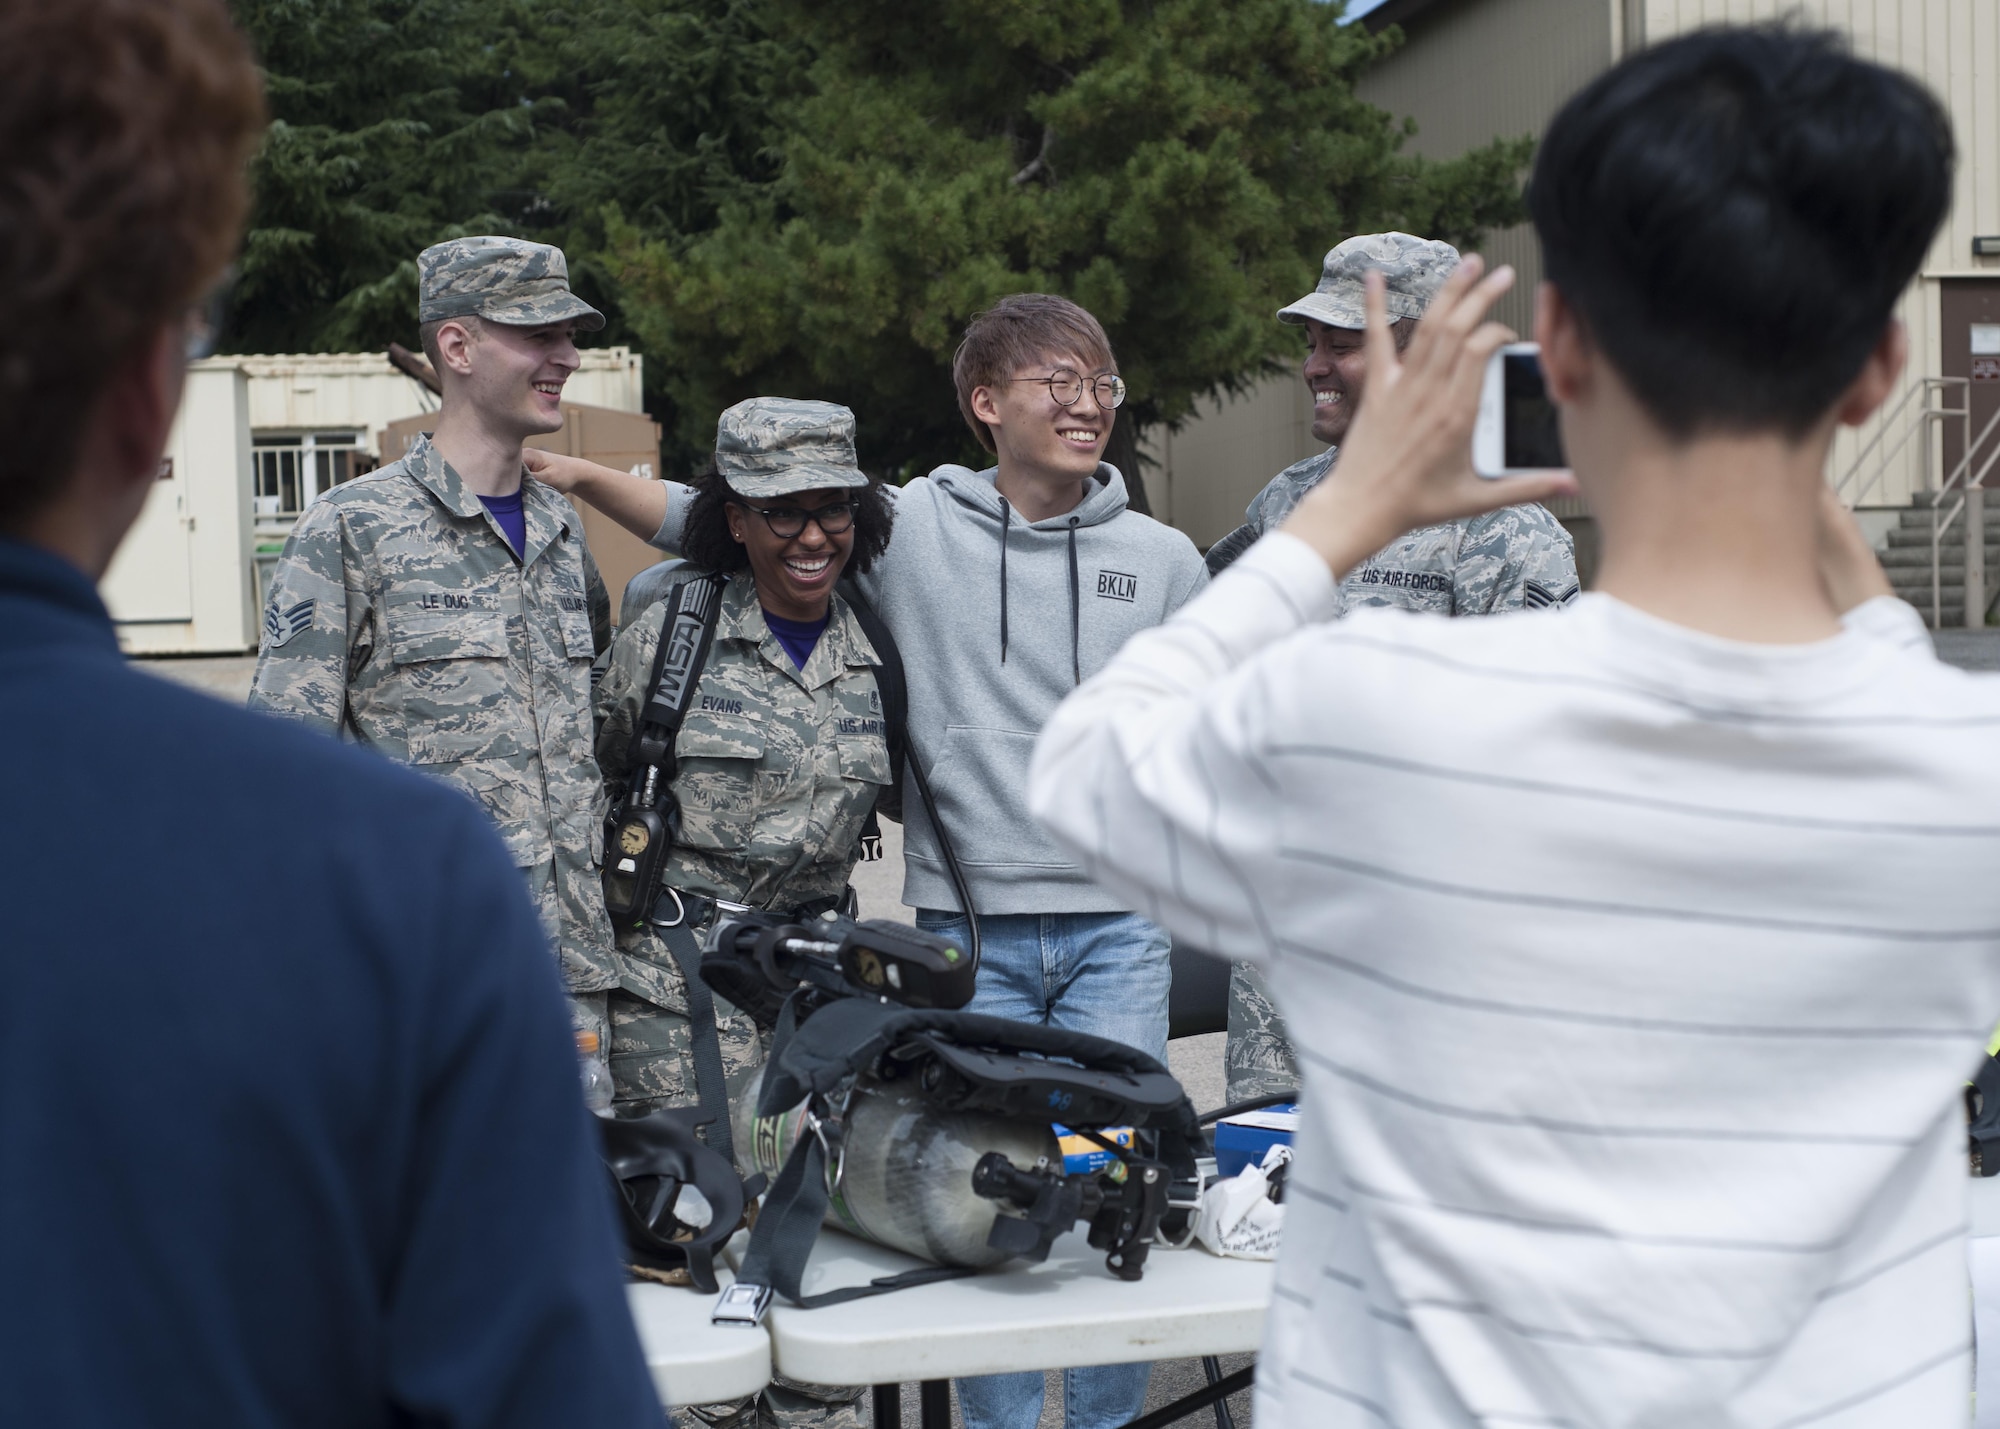 U.S. Air Force Airmen and environmental engineering students from Kunsan National University pose for a photo while visiting Kunsan Air Base, Republic of Korea, Sept. 29, 2017. During the tour, students were taught about what steps are taken to ensure mission-ready medics to strengthen the Wolf Pack’s “Fight Tonight” capability. (U.S. Air Force photo by Staff Sgt. Victoria H. Taylor)